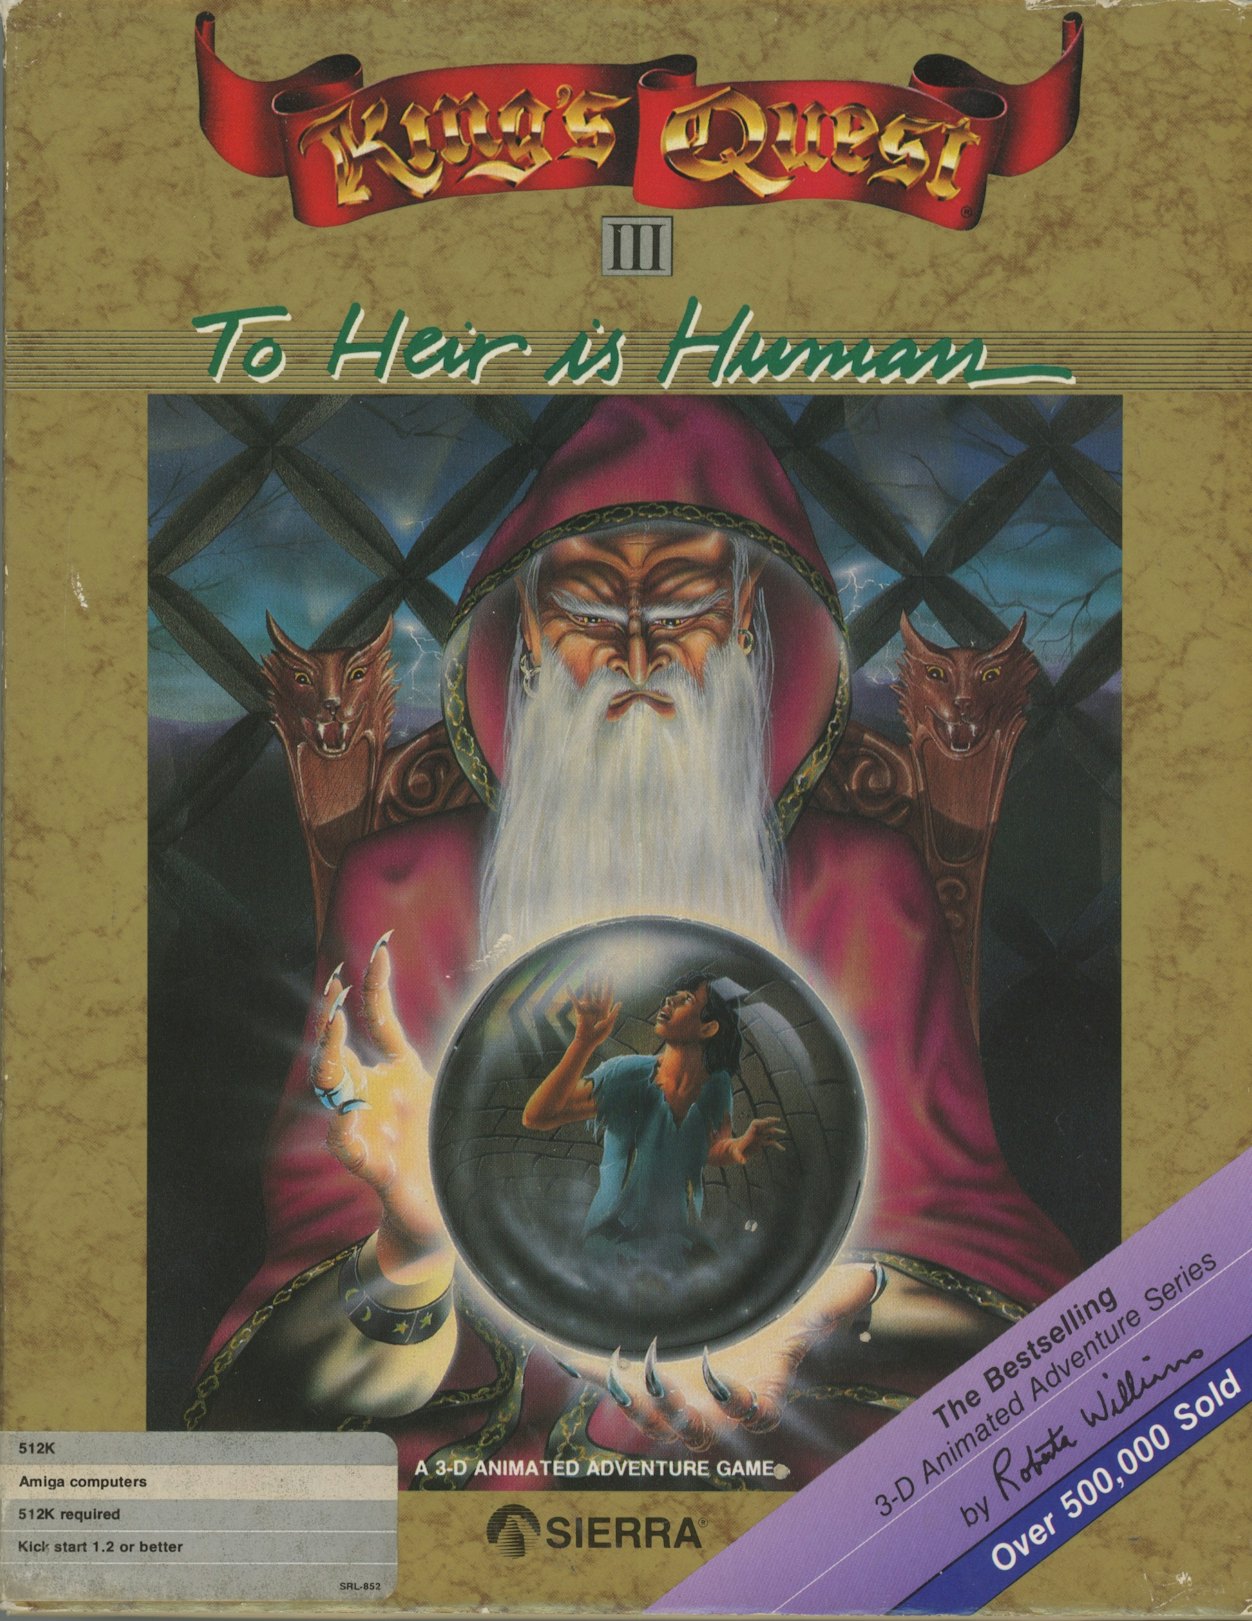 King’s Quest III: To Heir is Human